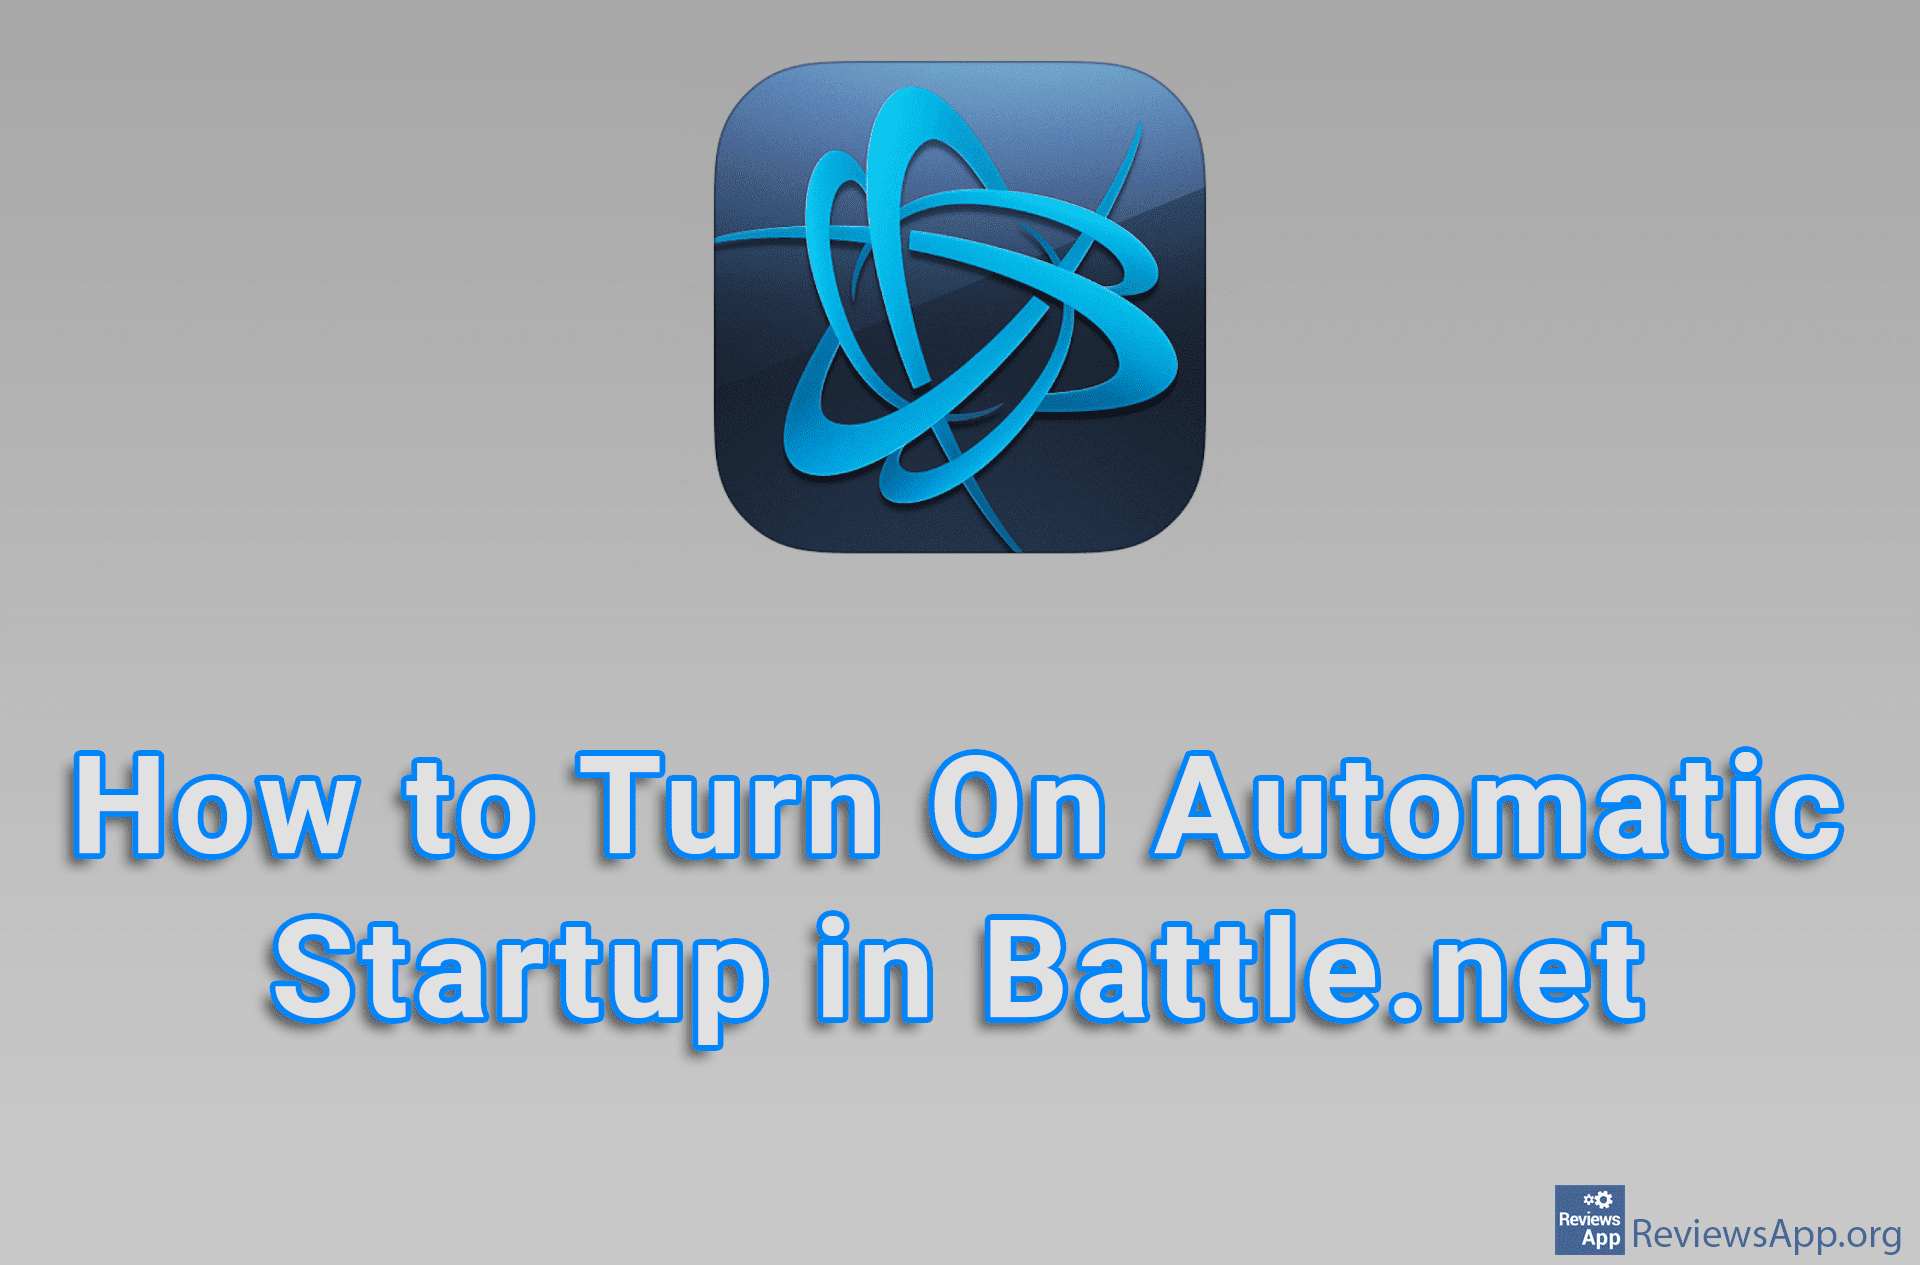 How to Turn On Automatic Startup in Battle.net